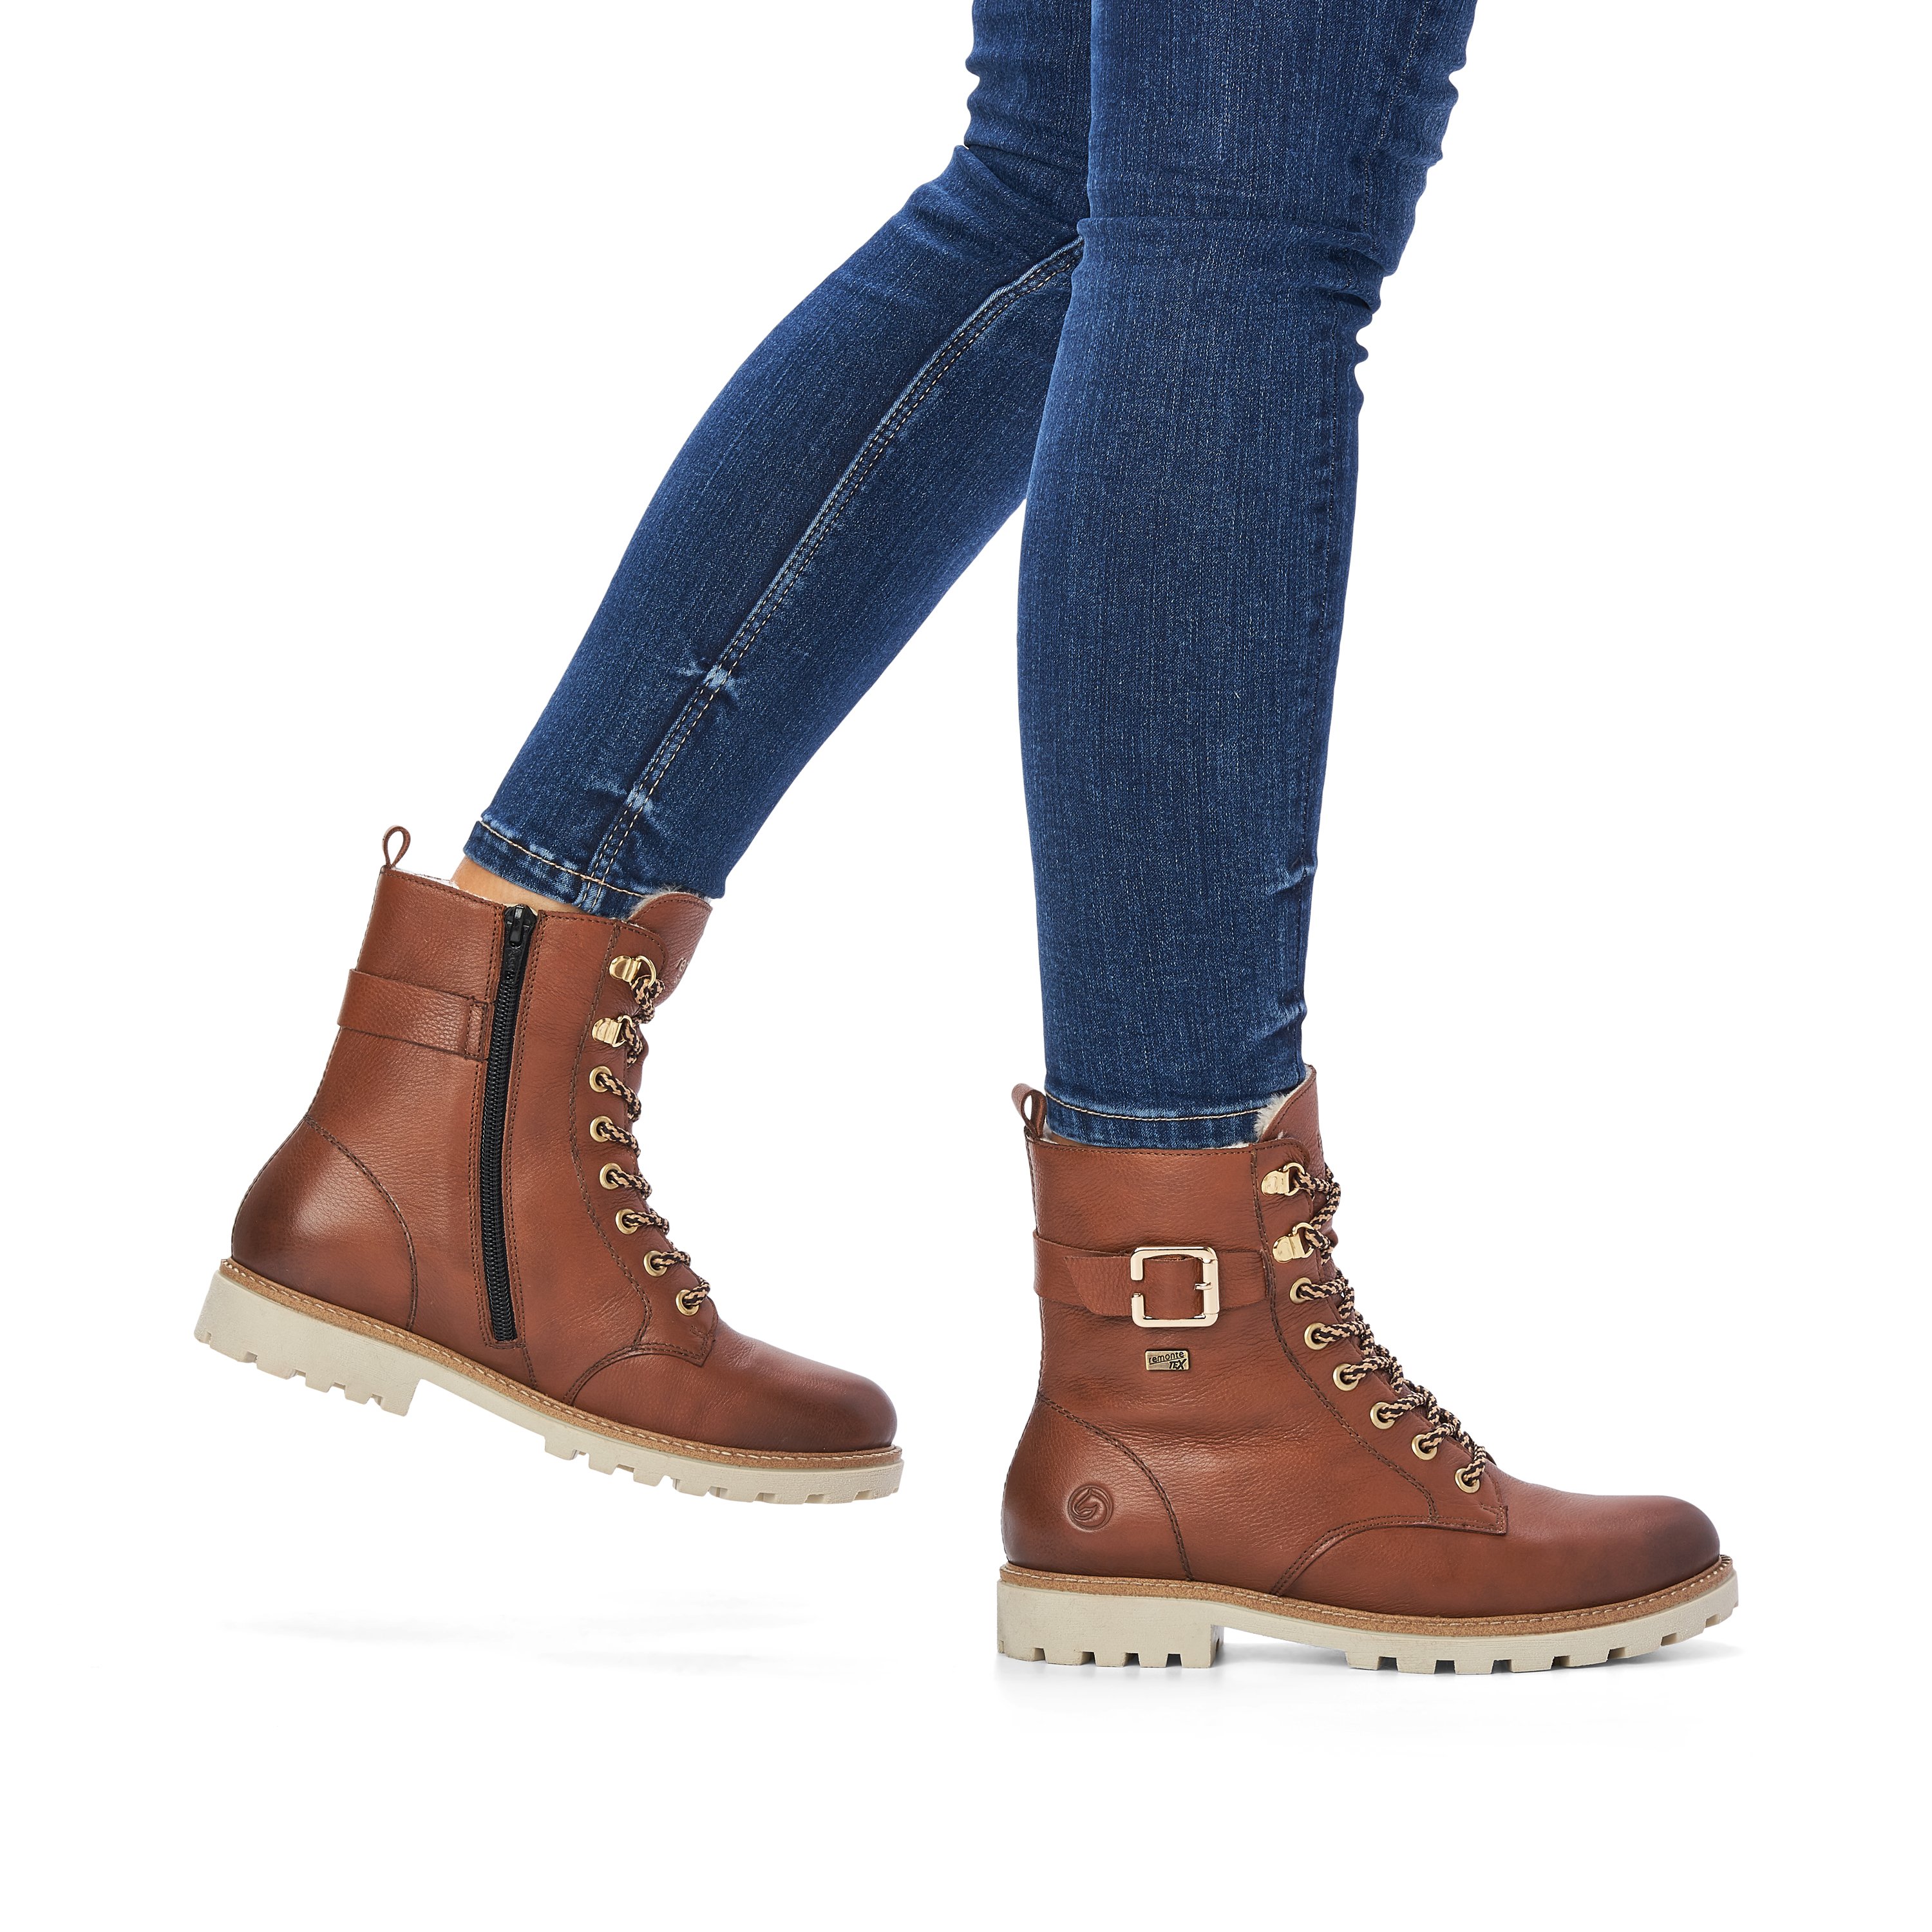 Mocha brown remonte women´s lace-up boots D8475-24 with cushioning profile sole. Shoe on foot